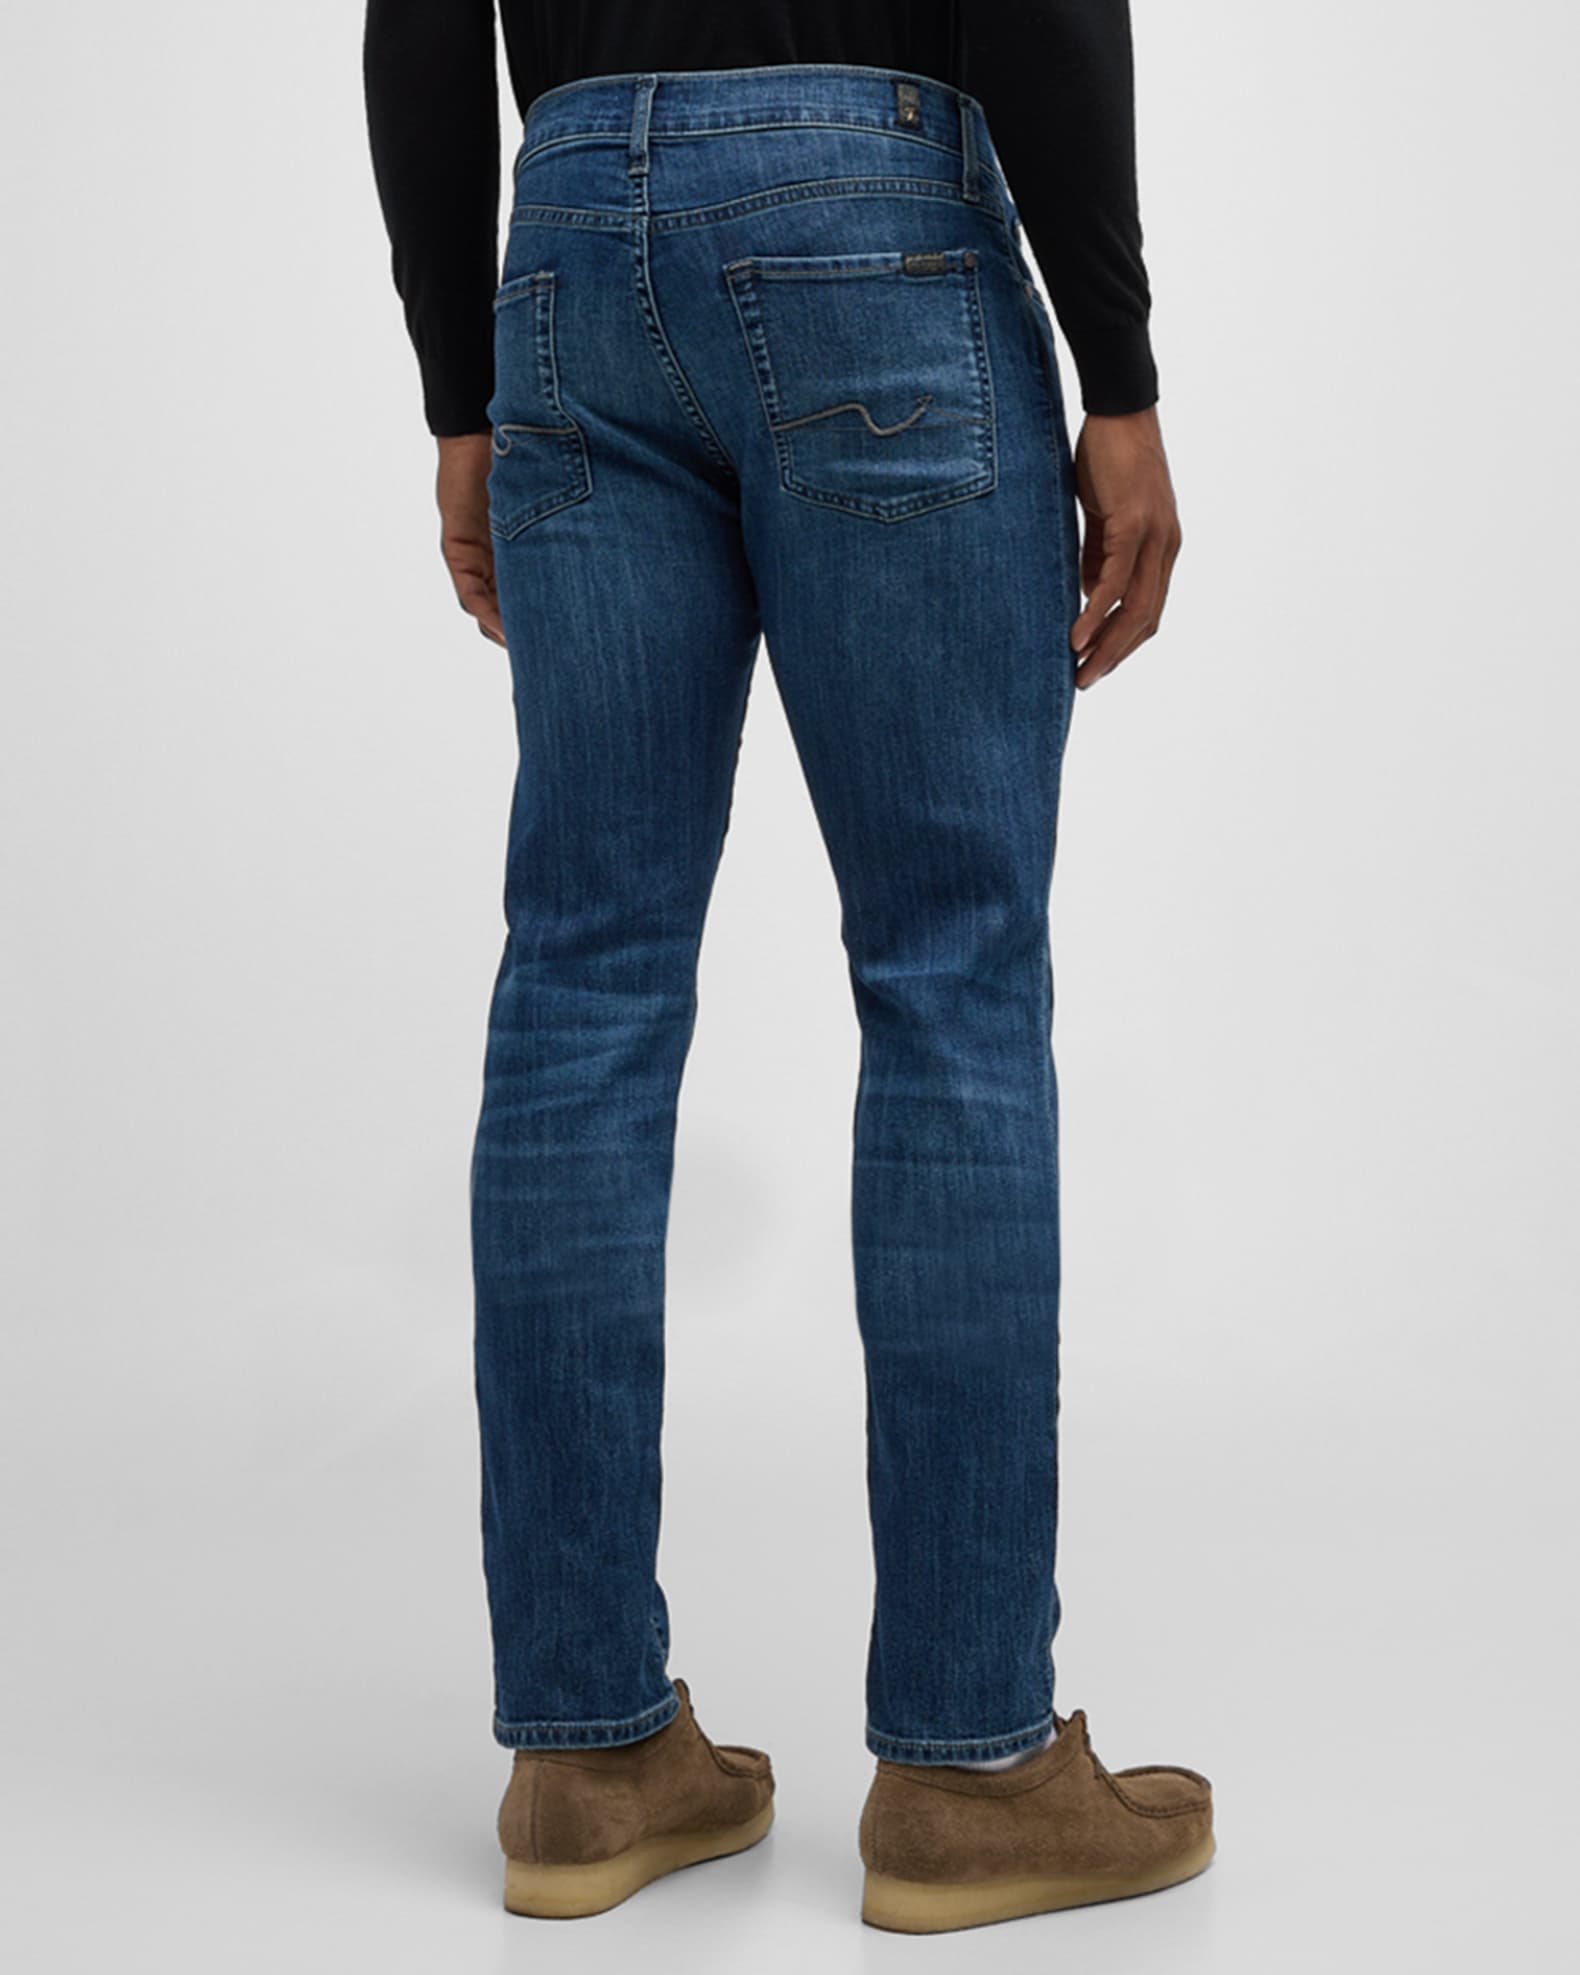 7 for all mankind Men's Slimmy Stretch Jeans | Neiman Marcus